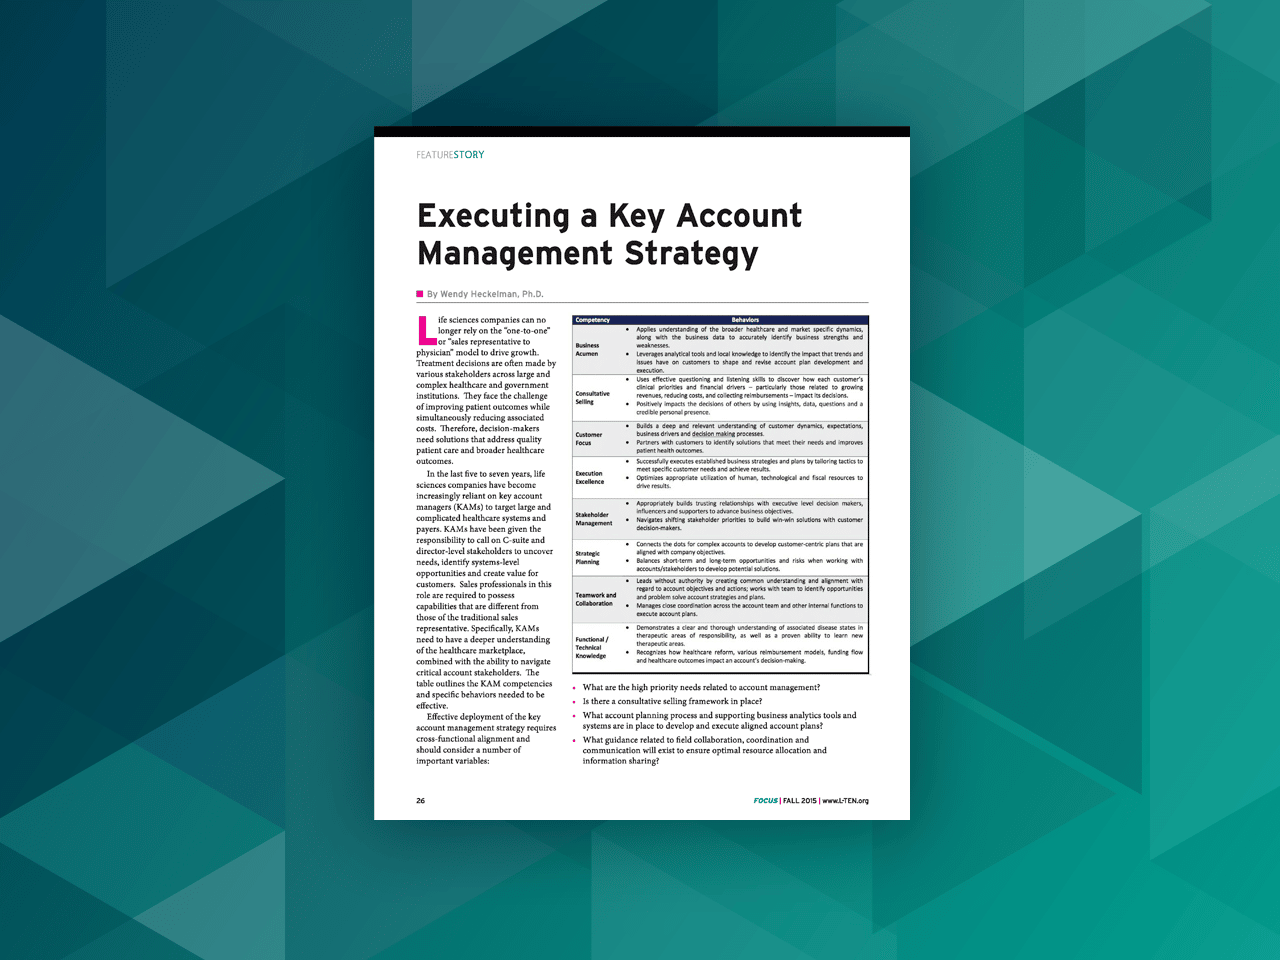 Executing a Key Account Management Strategy